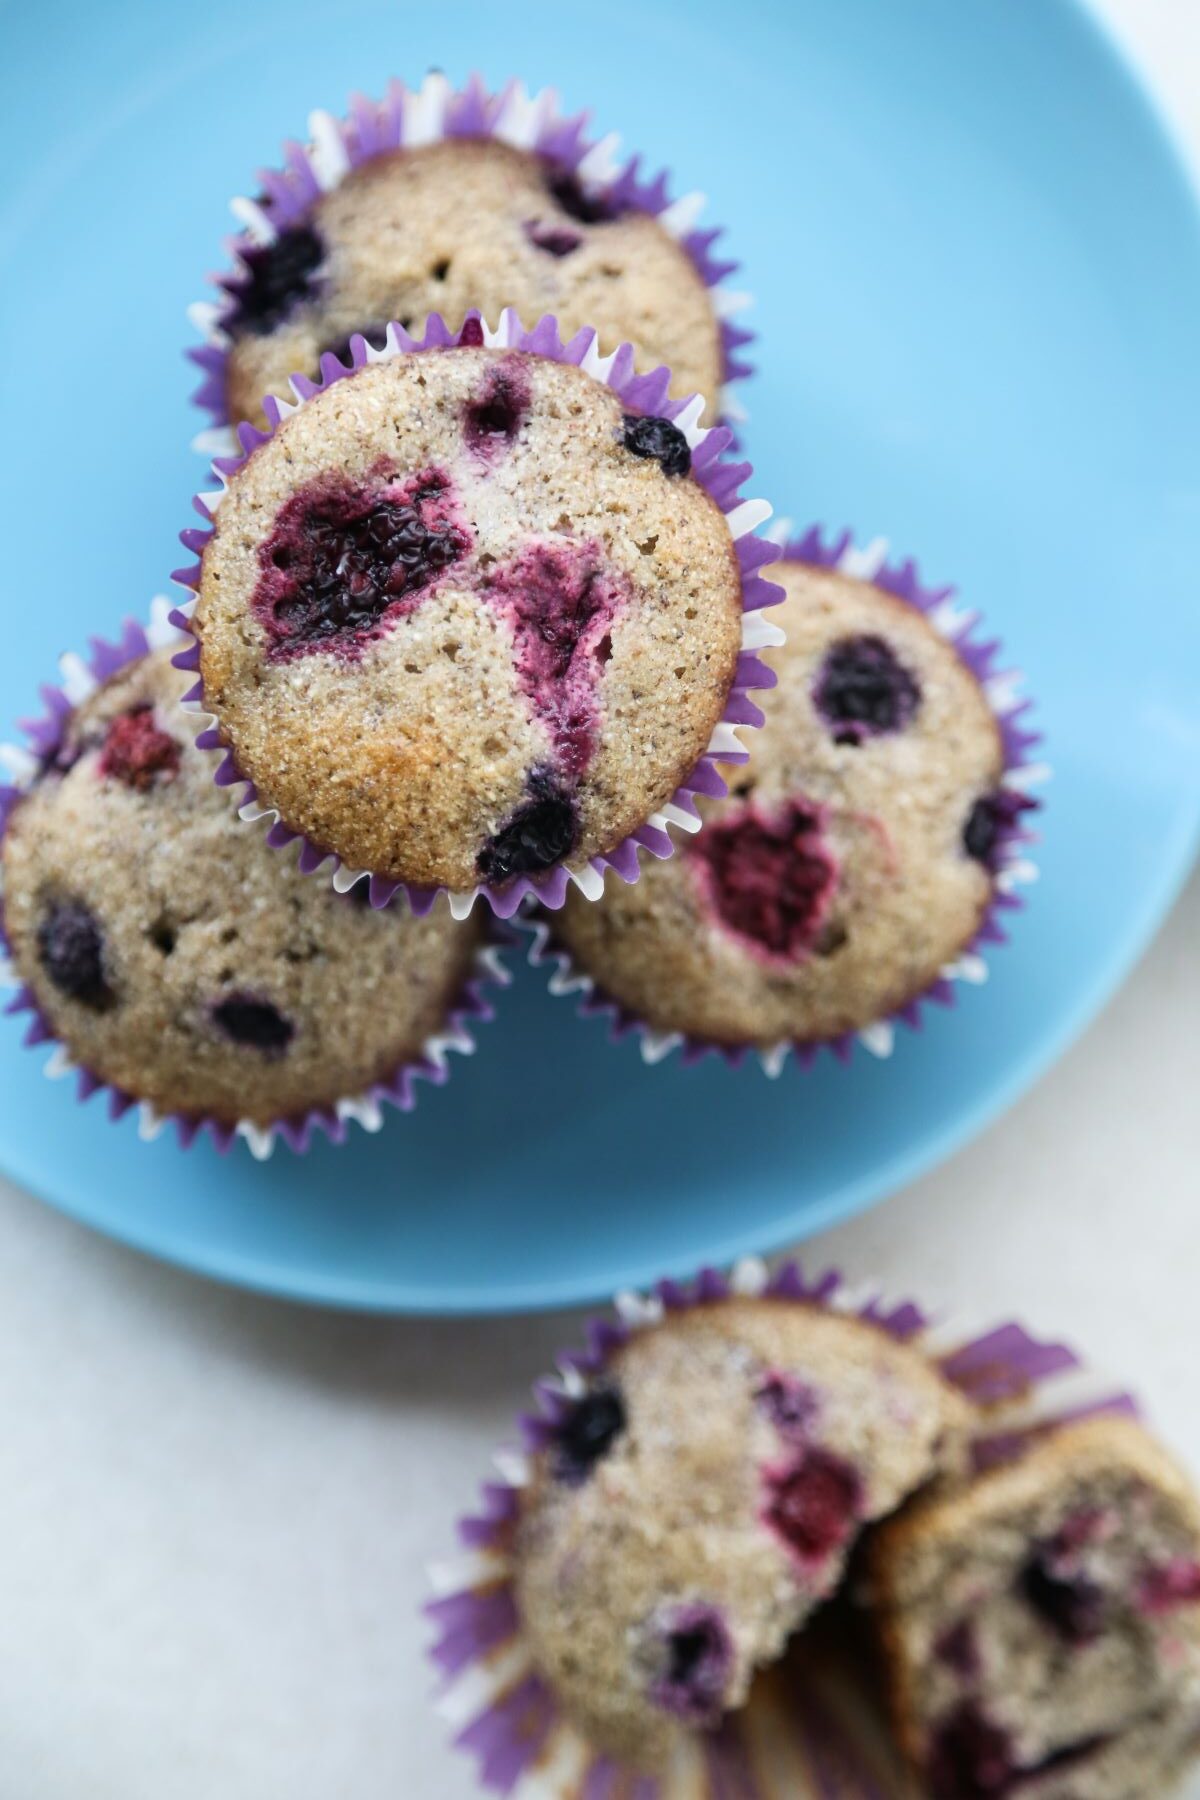 Mixed berry muffins with liners on a light blue plate seen from above.